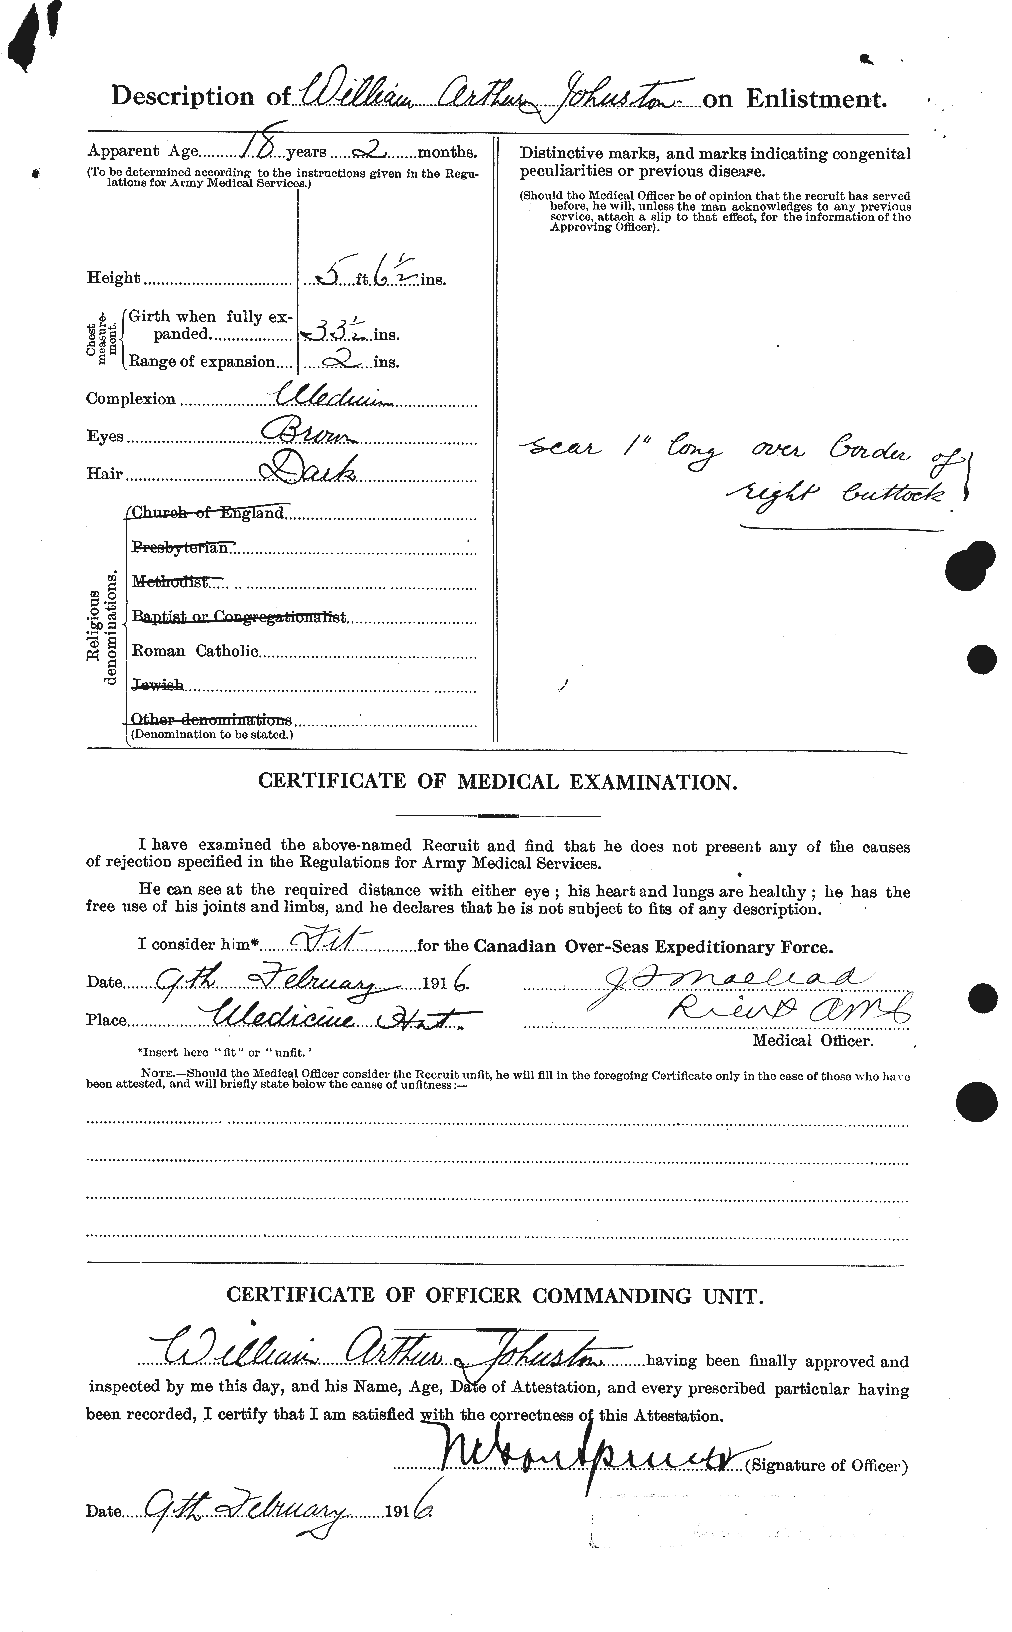 Personnel Records of the First World War - CEF 427302b